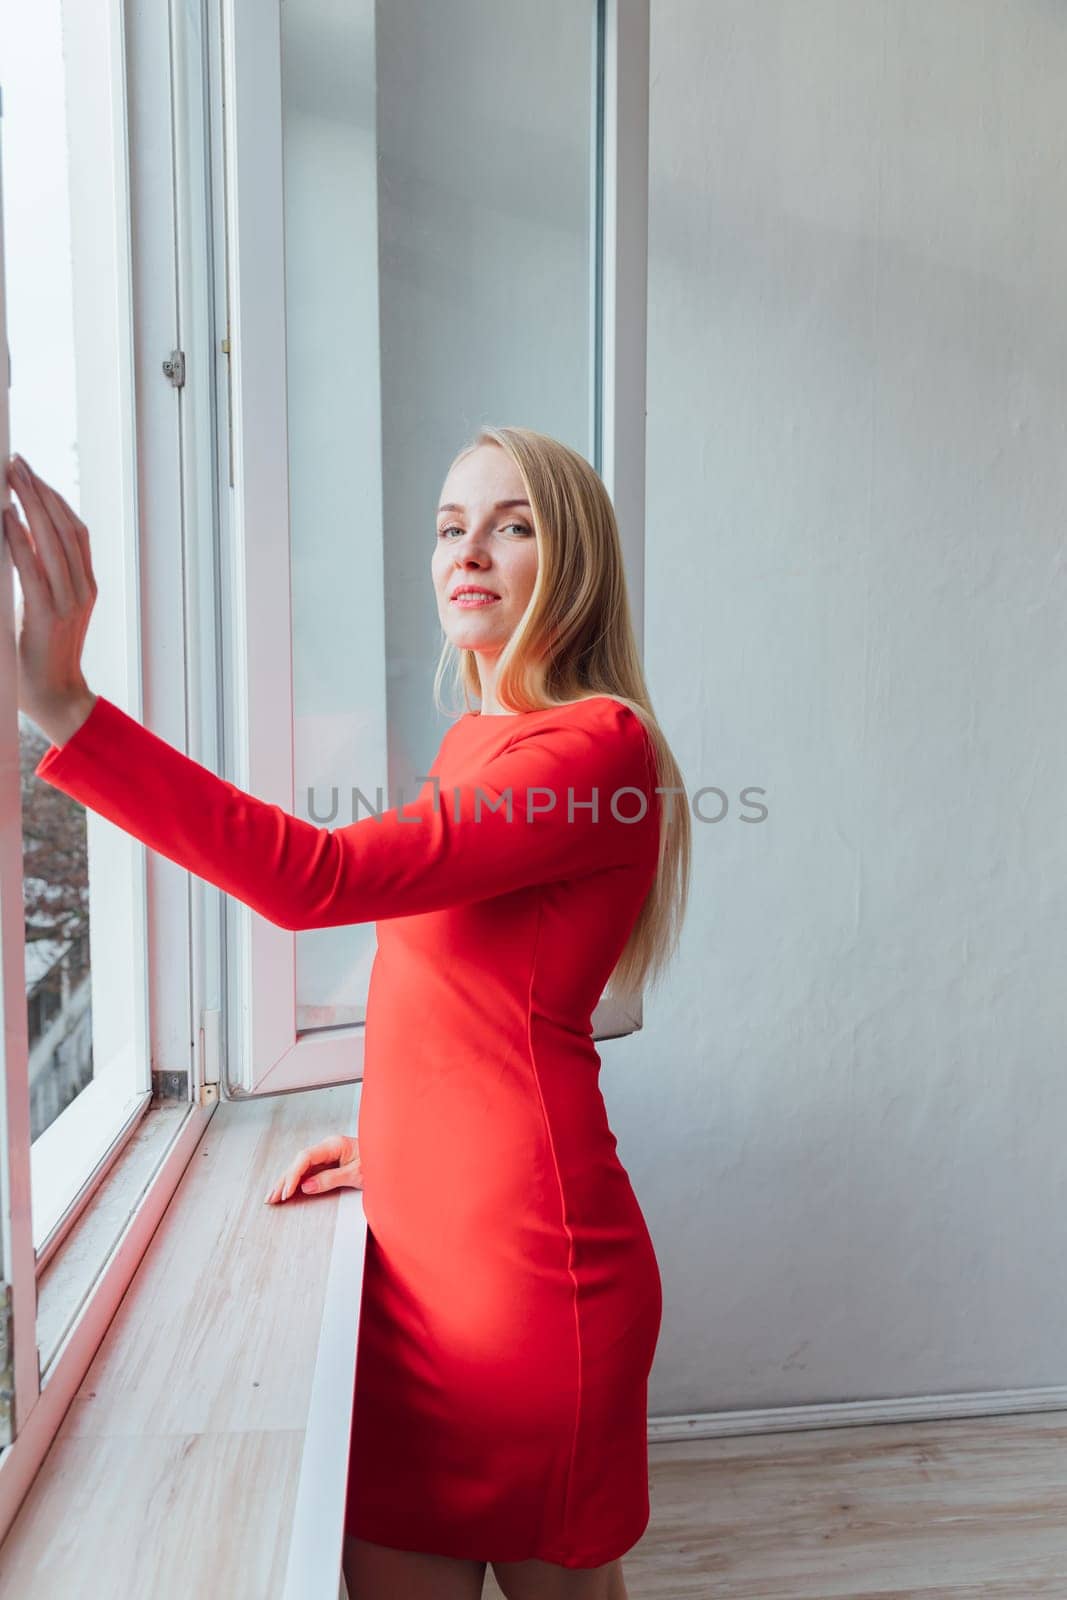 A woman in a red dress stands in a room by the window by Simakov